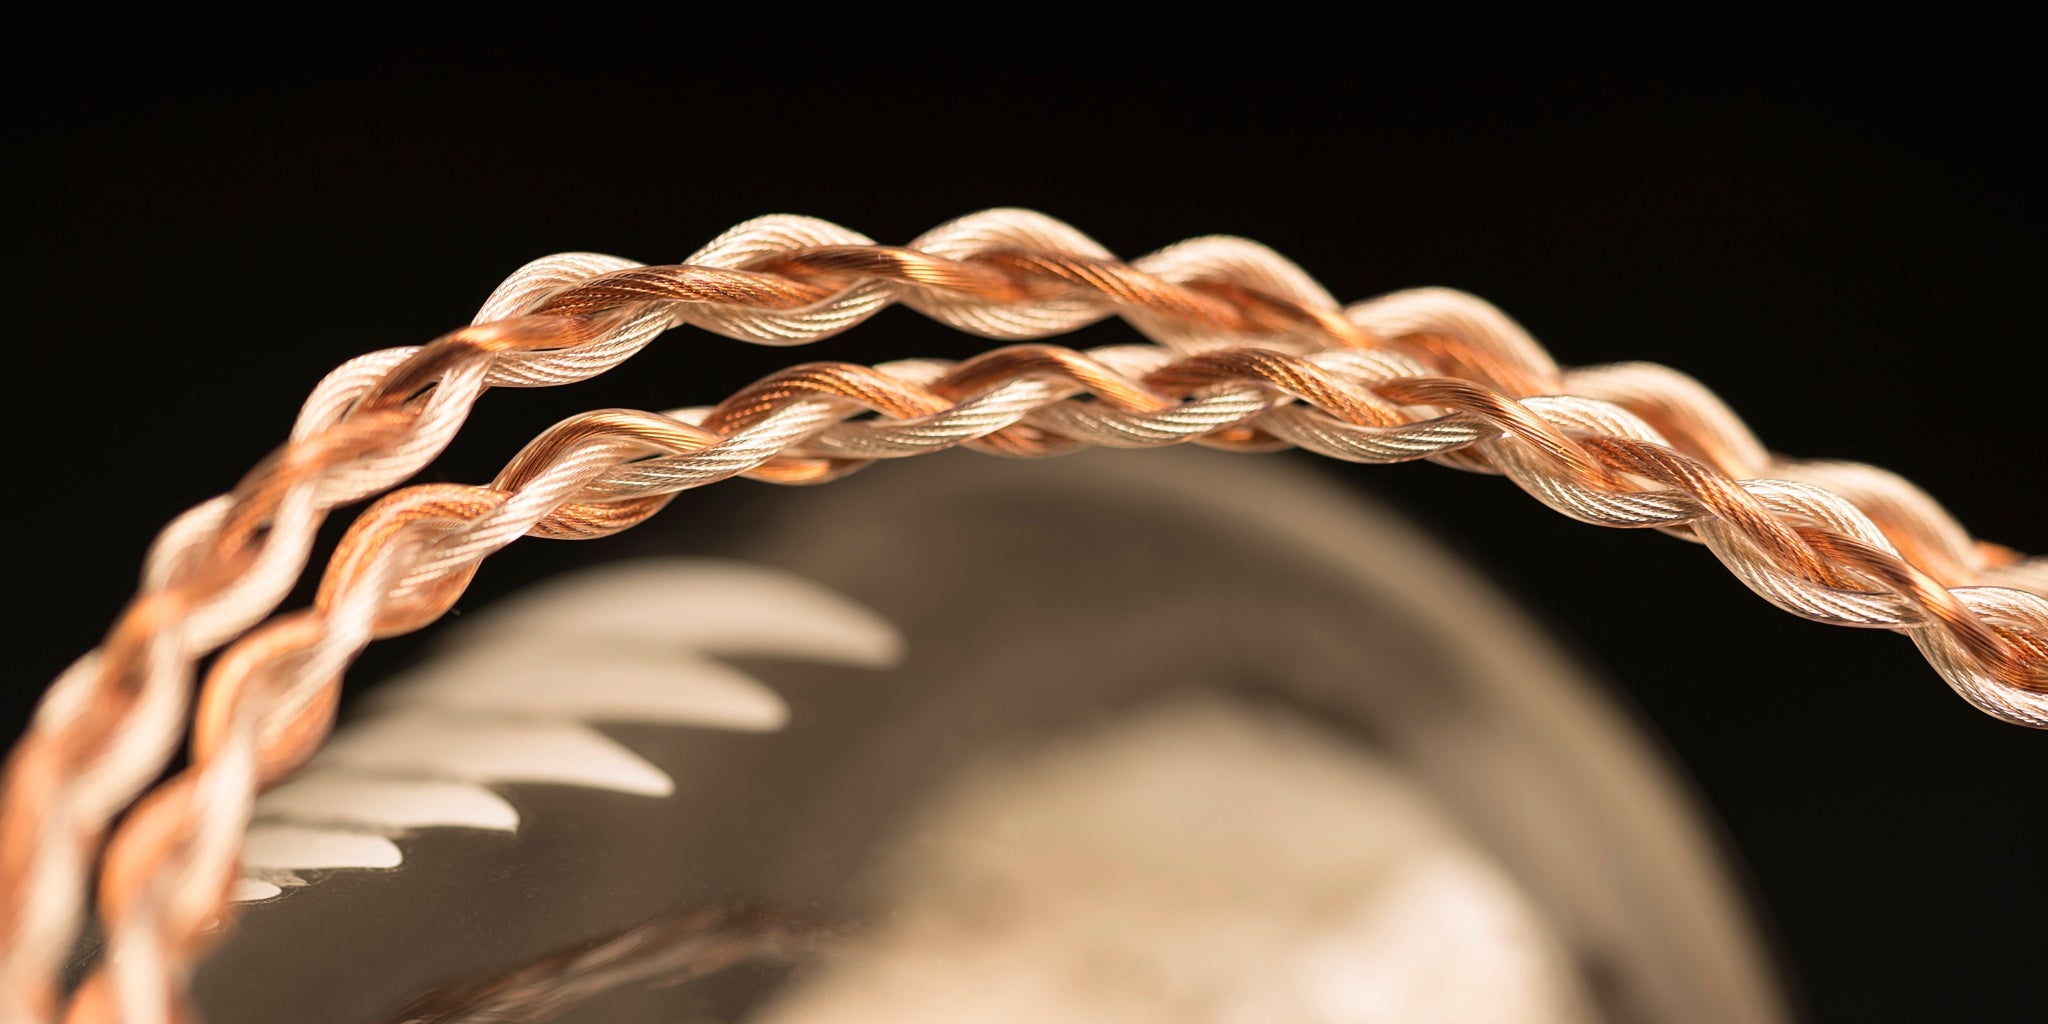 Effect Audio Ares S Cadmus closeup highlighting copper and silver blend with braided design